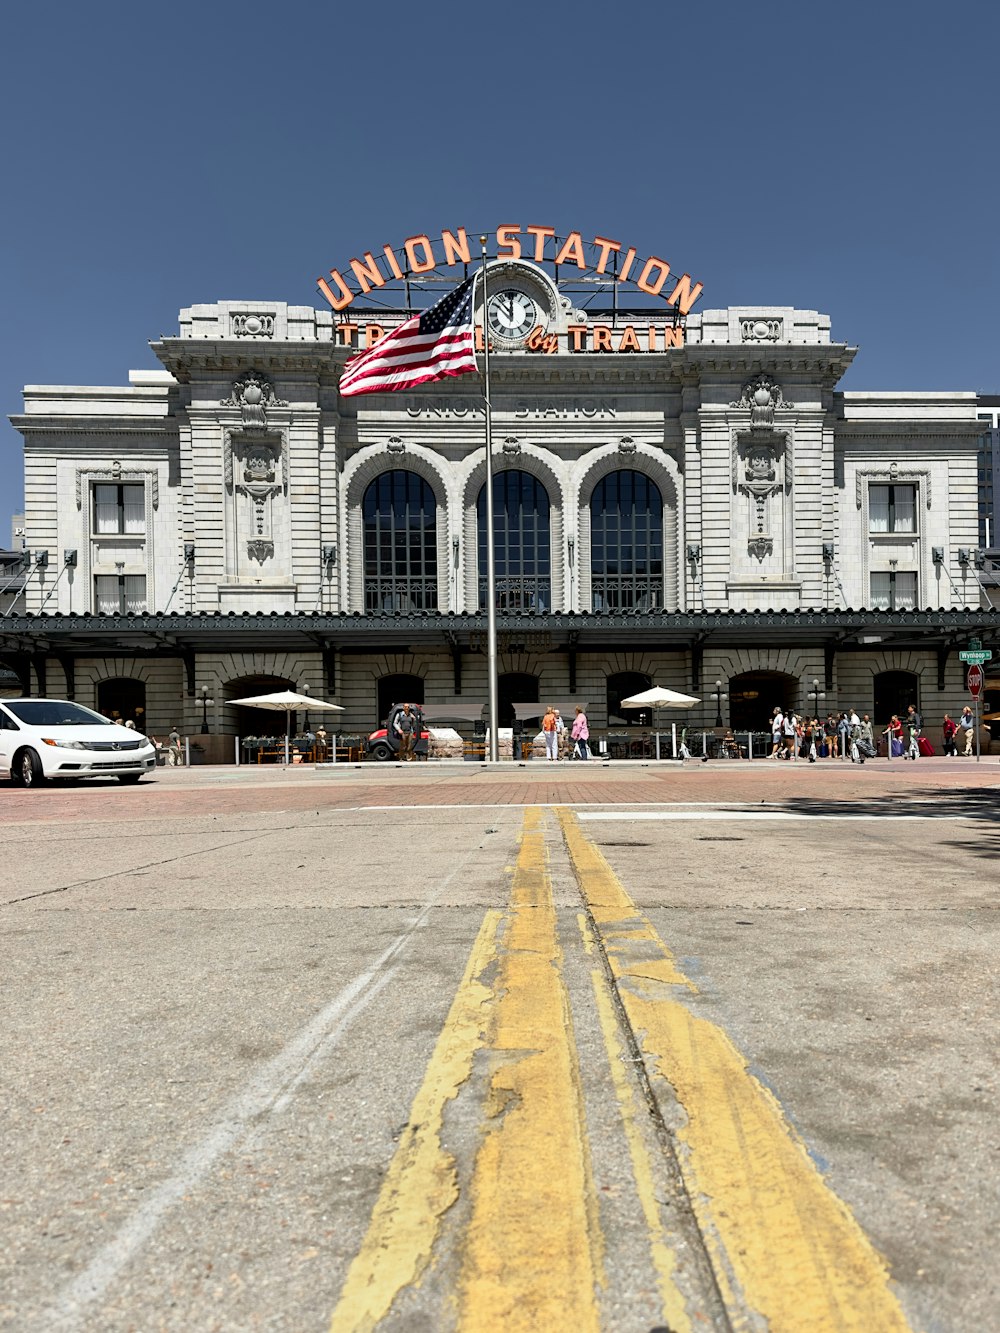 a train station with a yellow line painted on the ground